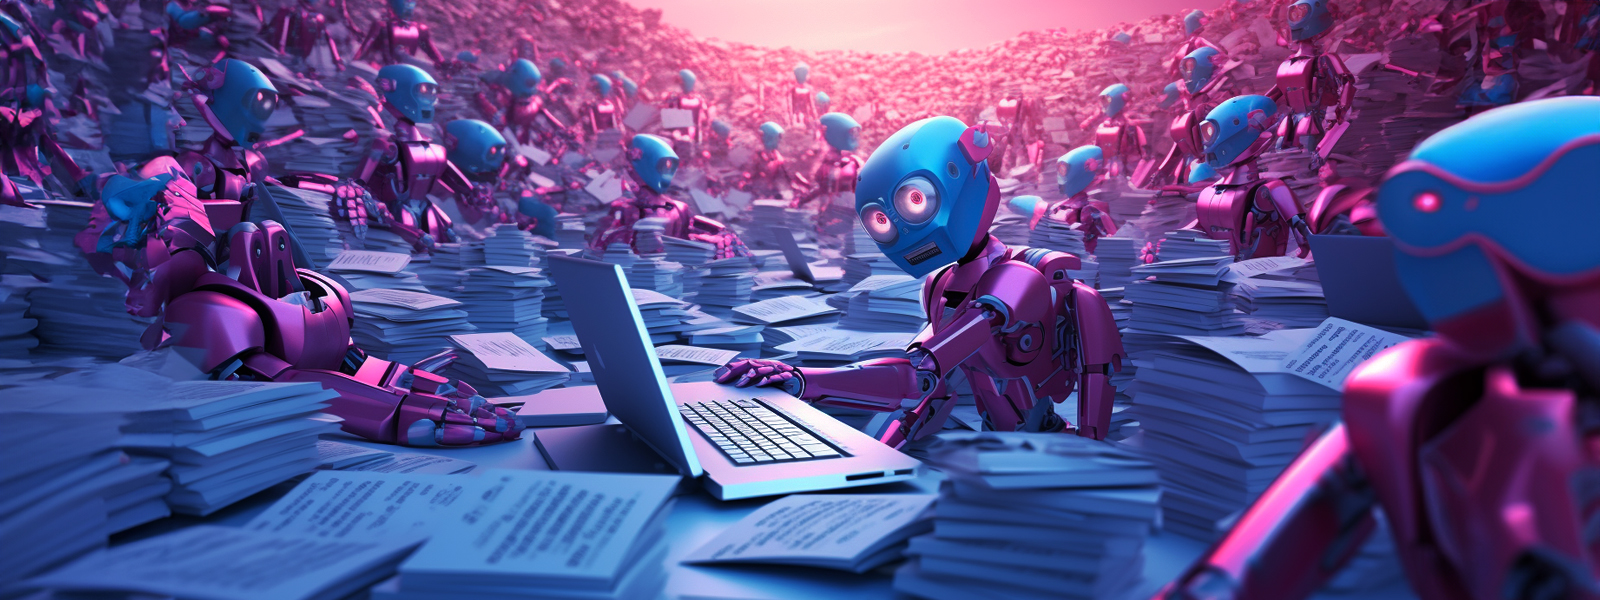 Robots sorting through piles of paperwork with one robot using a laptop amid a sea of documents.